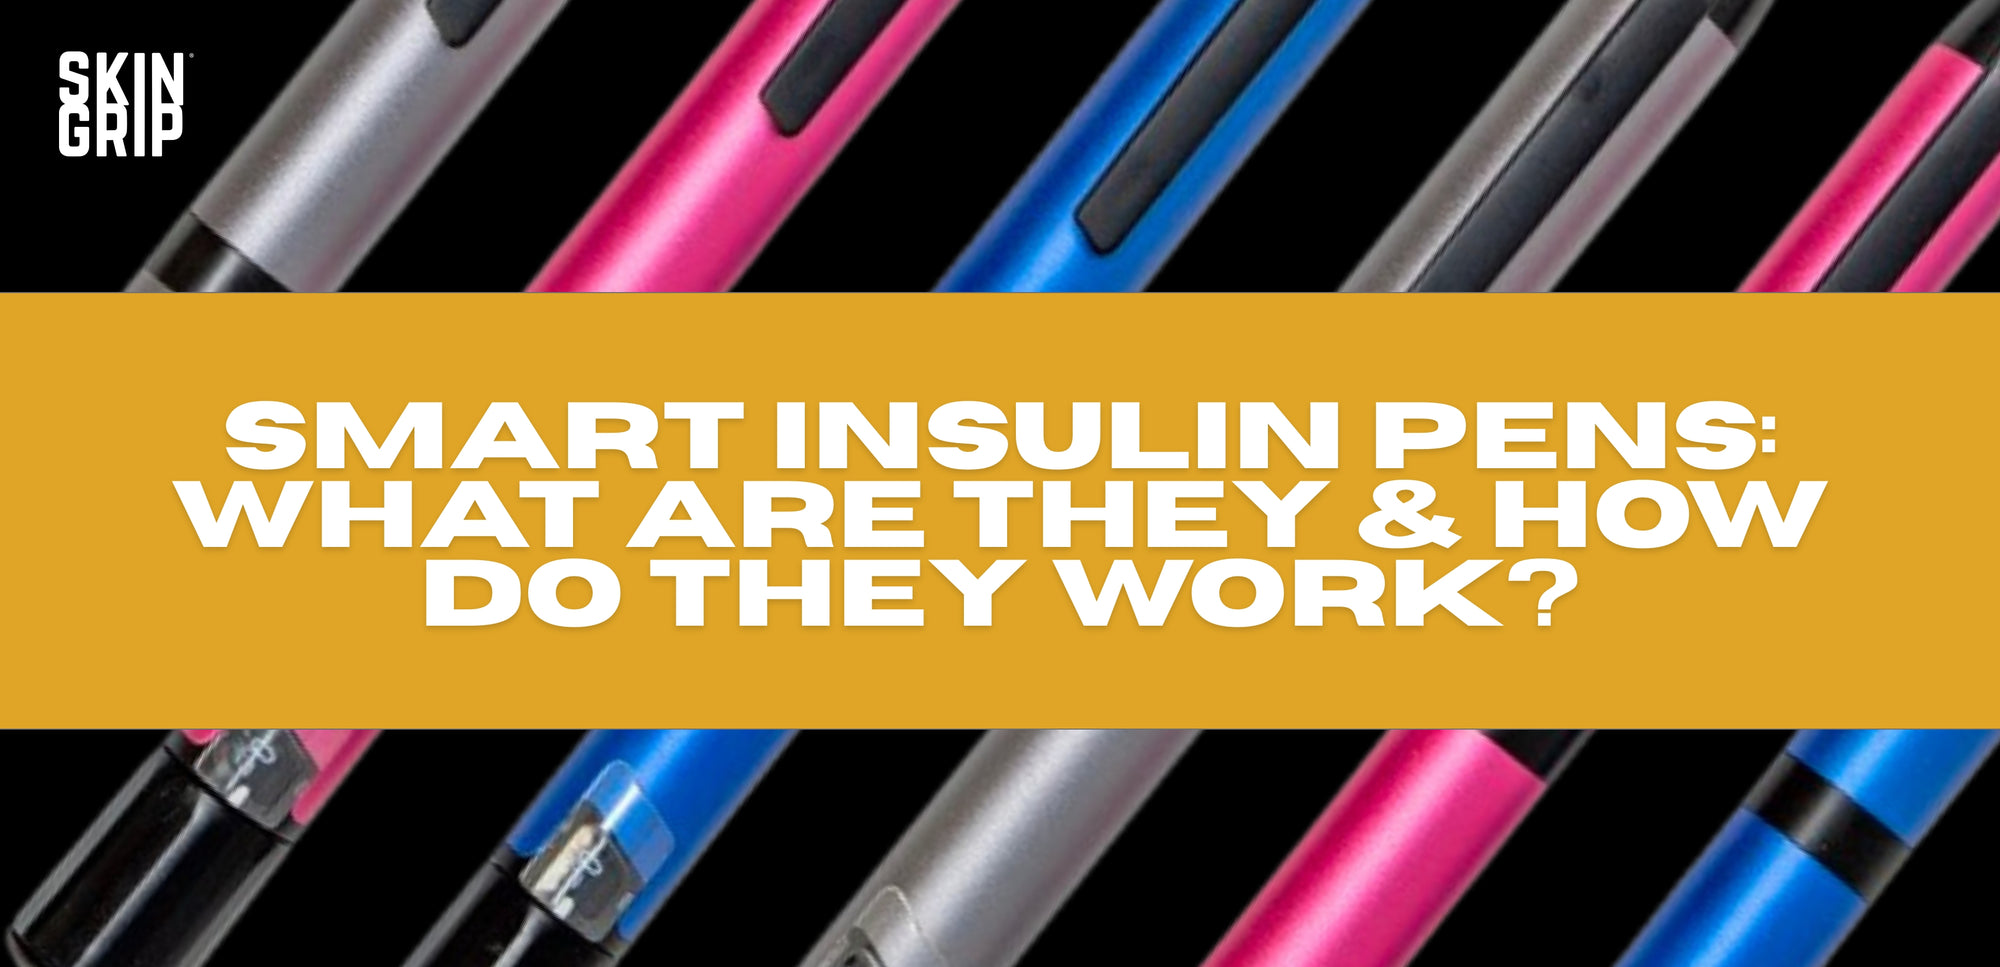 Smart Insulin Pens: What are they & how do they work?